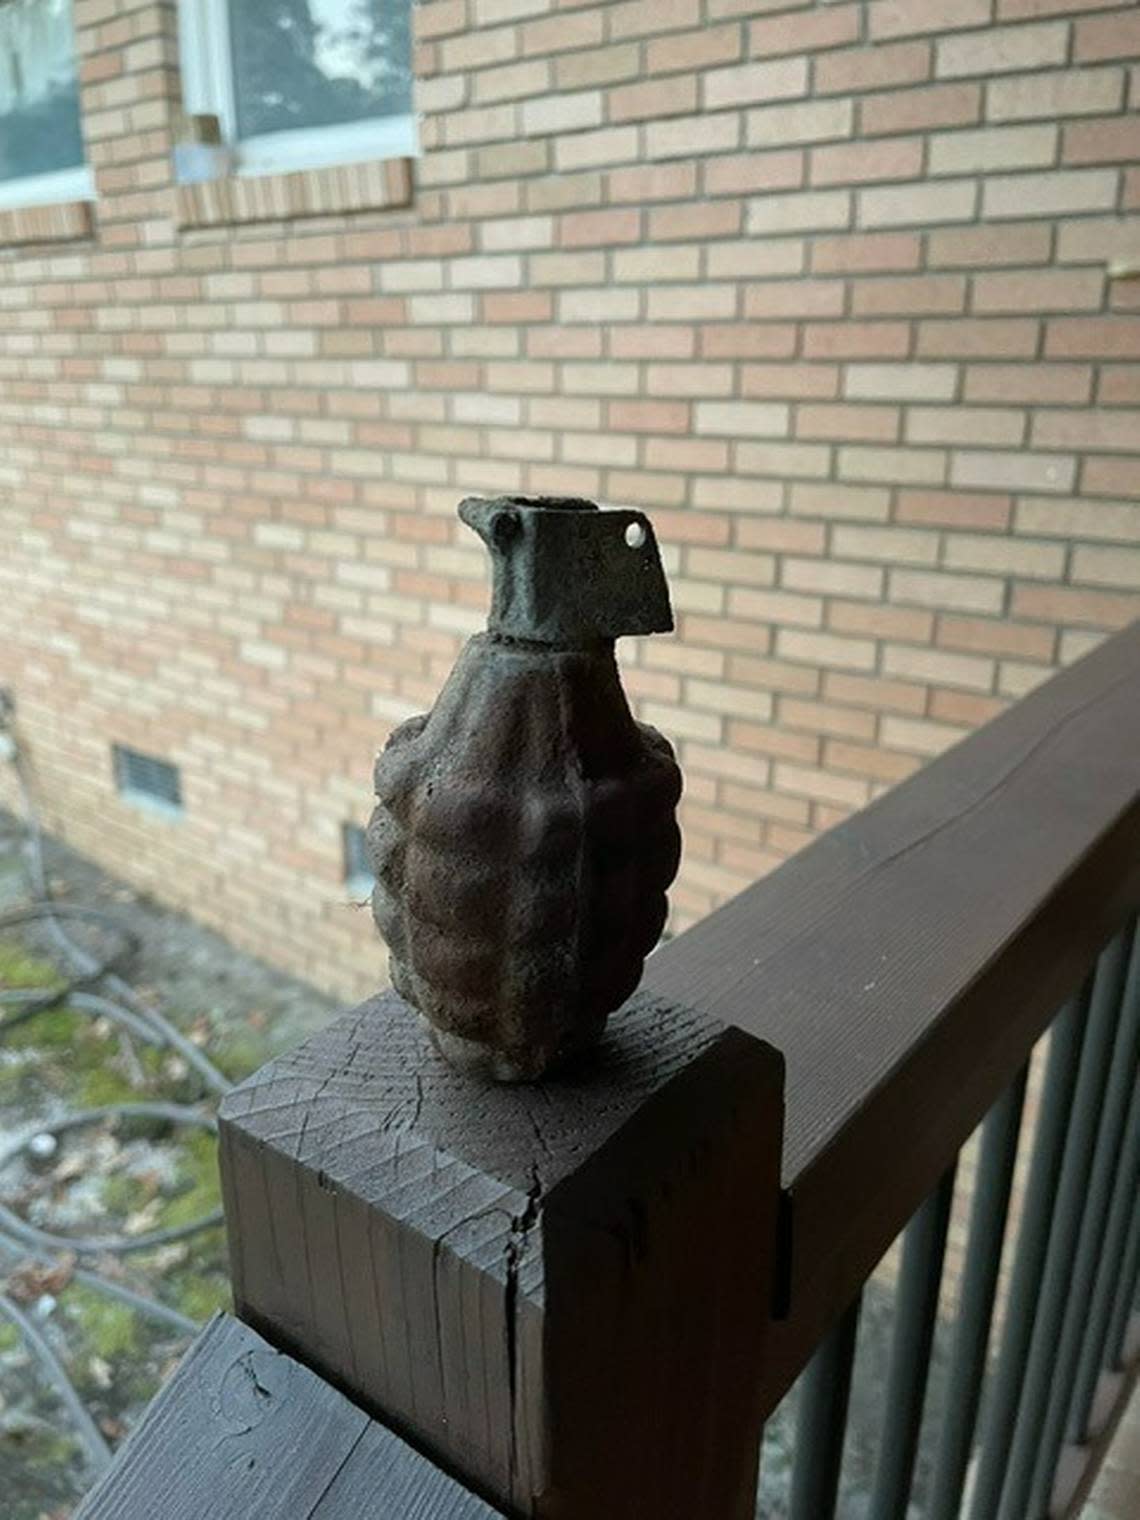 A grenade was found buried behind a home, the Forest Acres Police Department said.